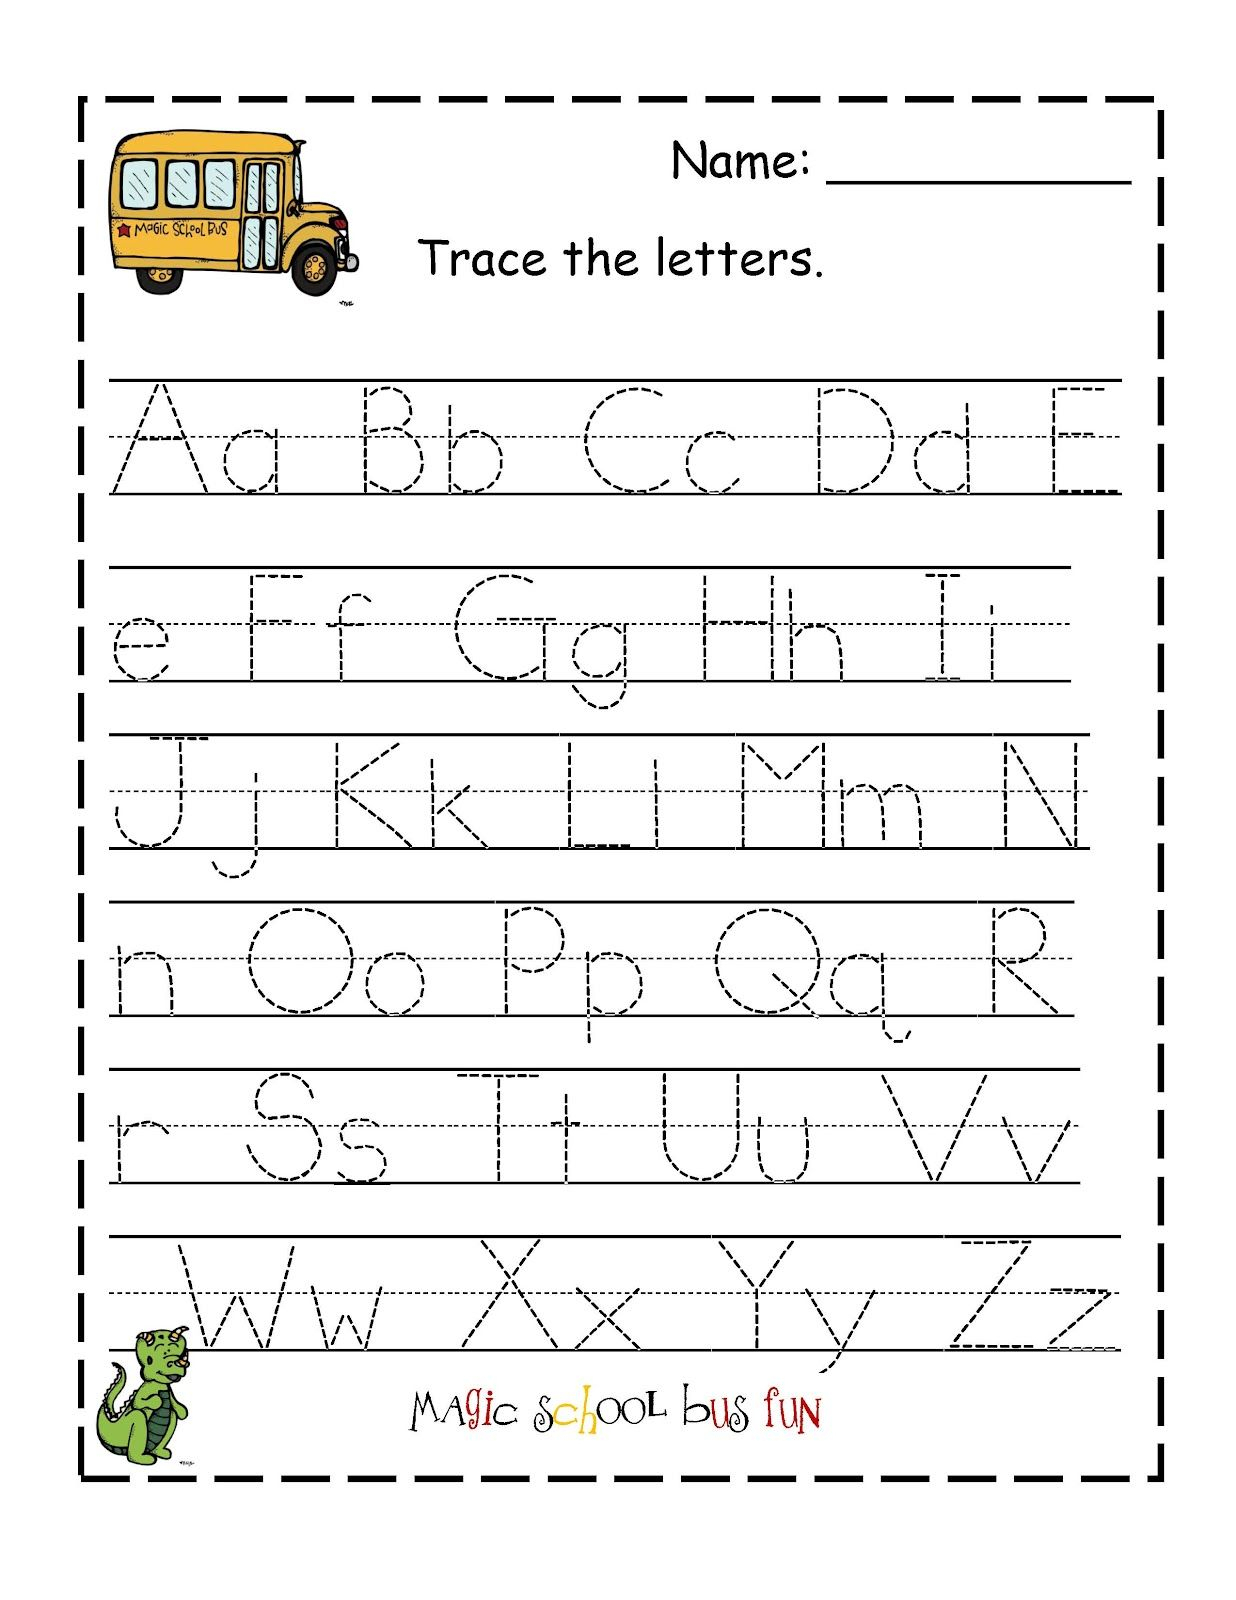 Trace Alphabet Letters To Print | Preschool Worksheets intended for Alphabet Letter Trace